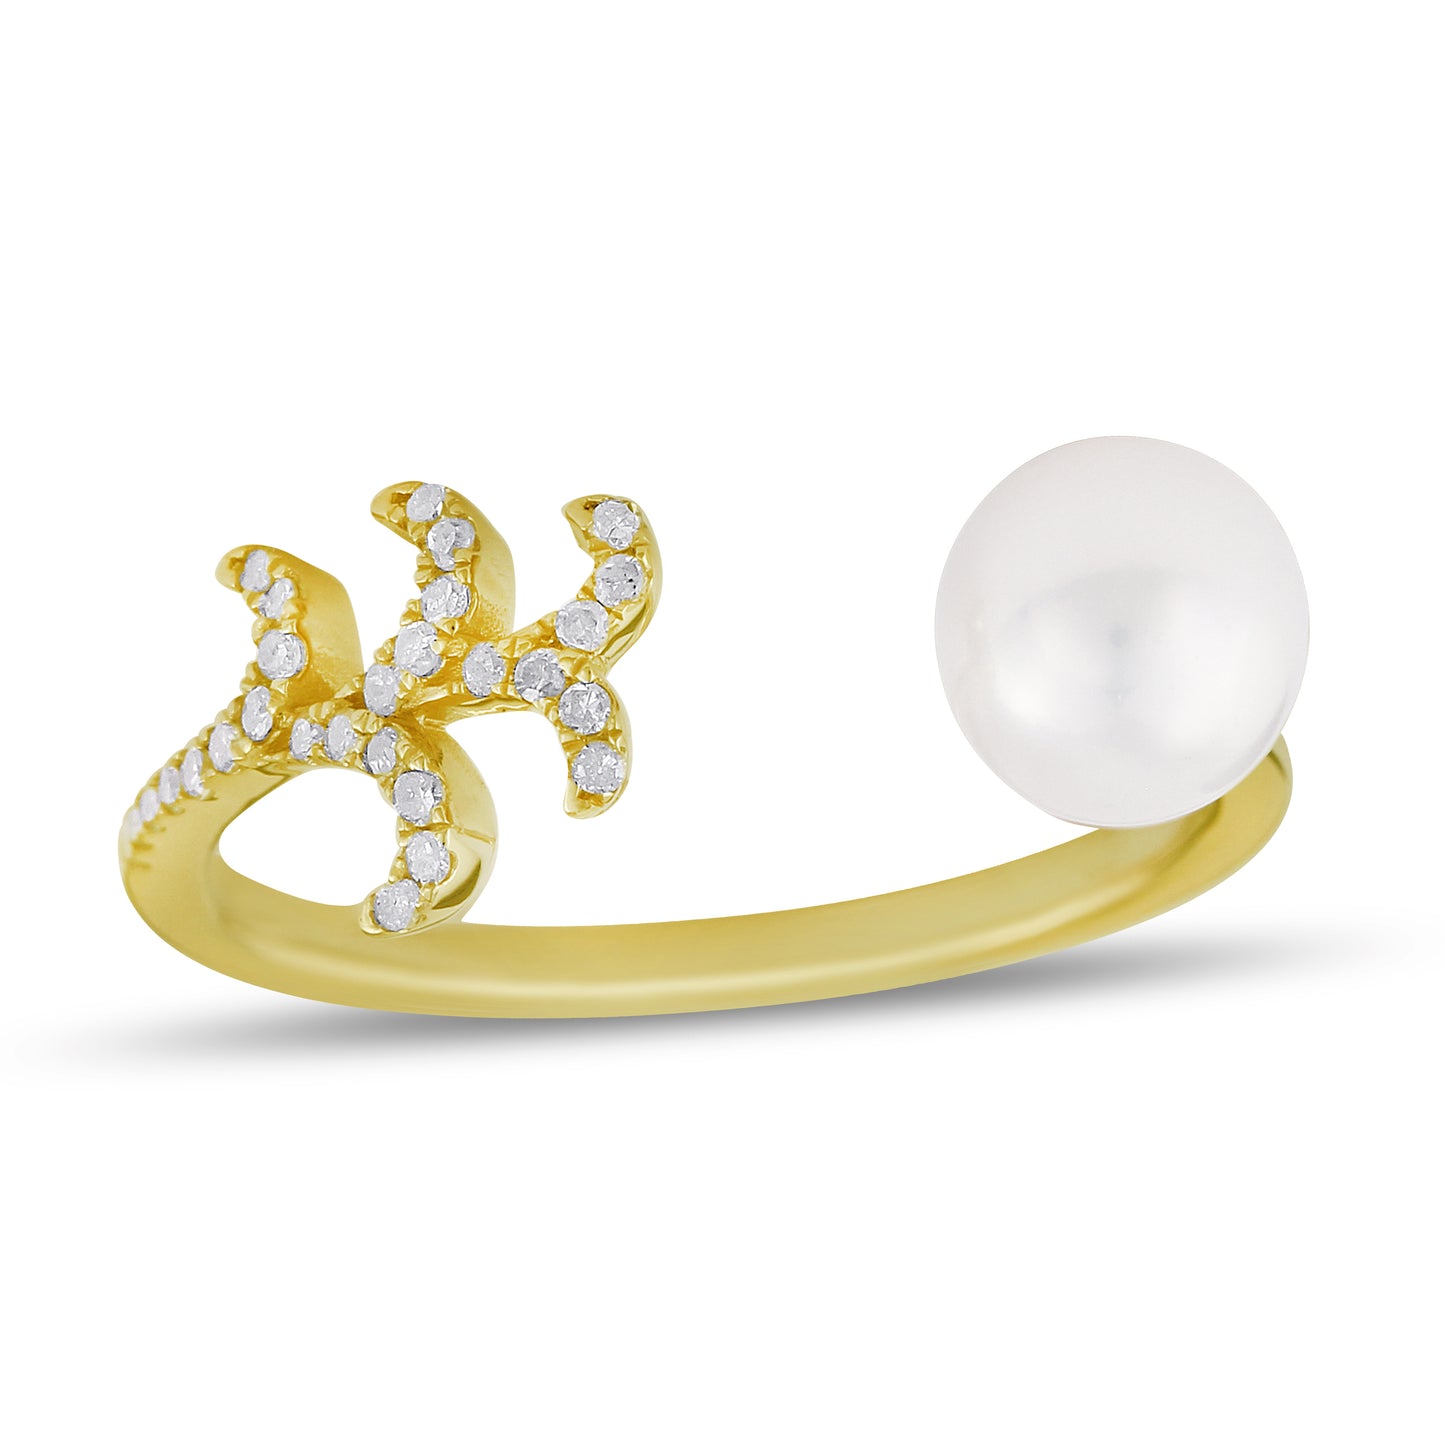 Belantina 1/10 Carat Diamond and Freshwater Pearl Open Leaf Ring In 14K Gold